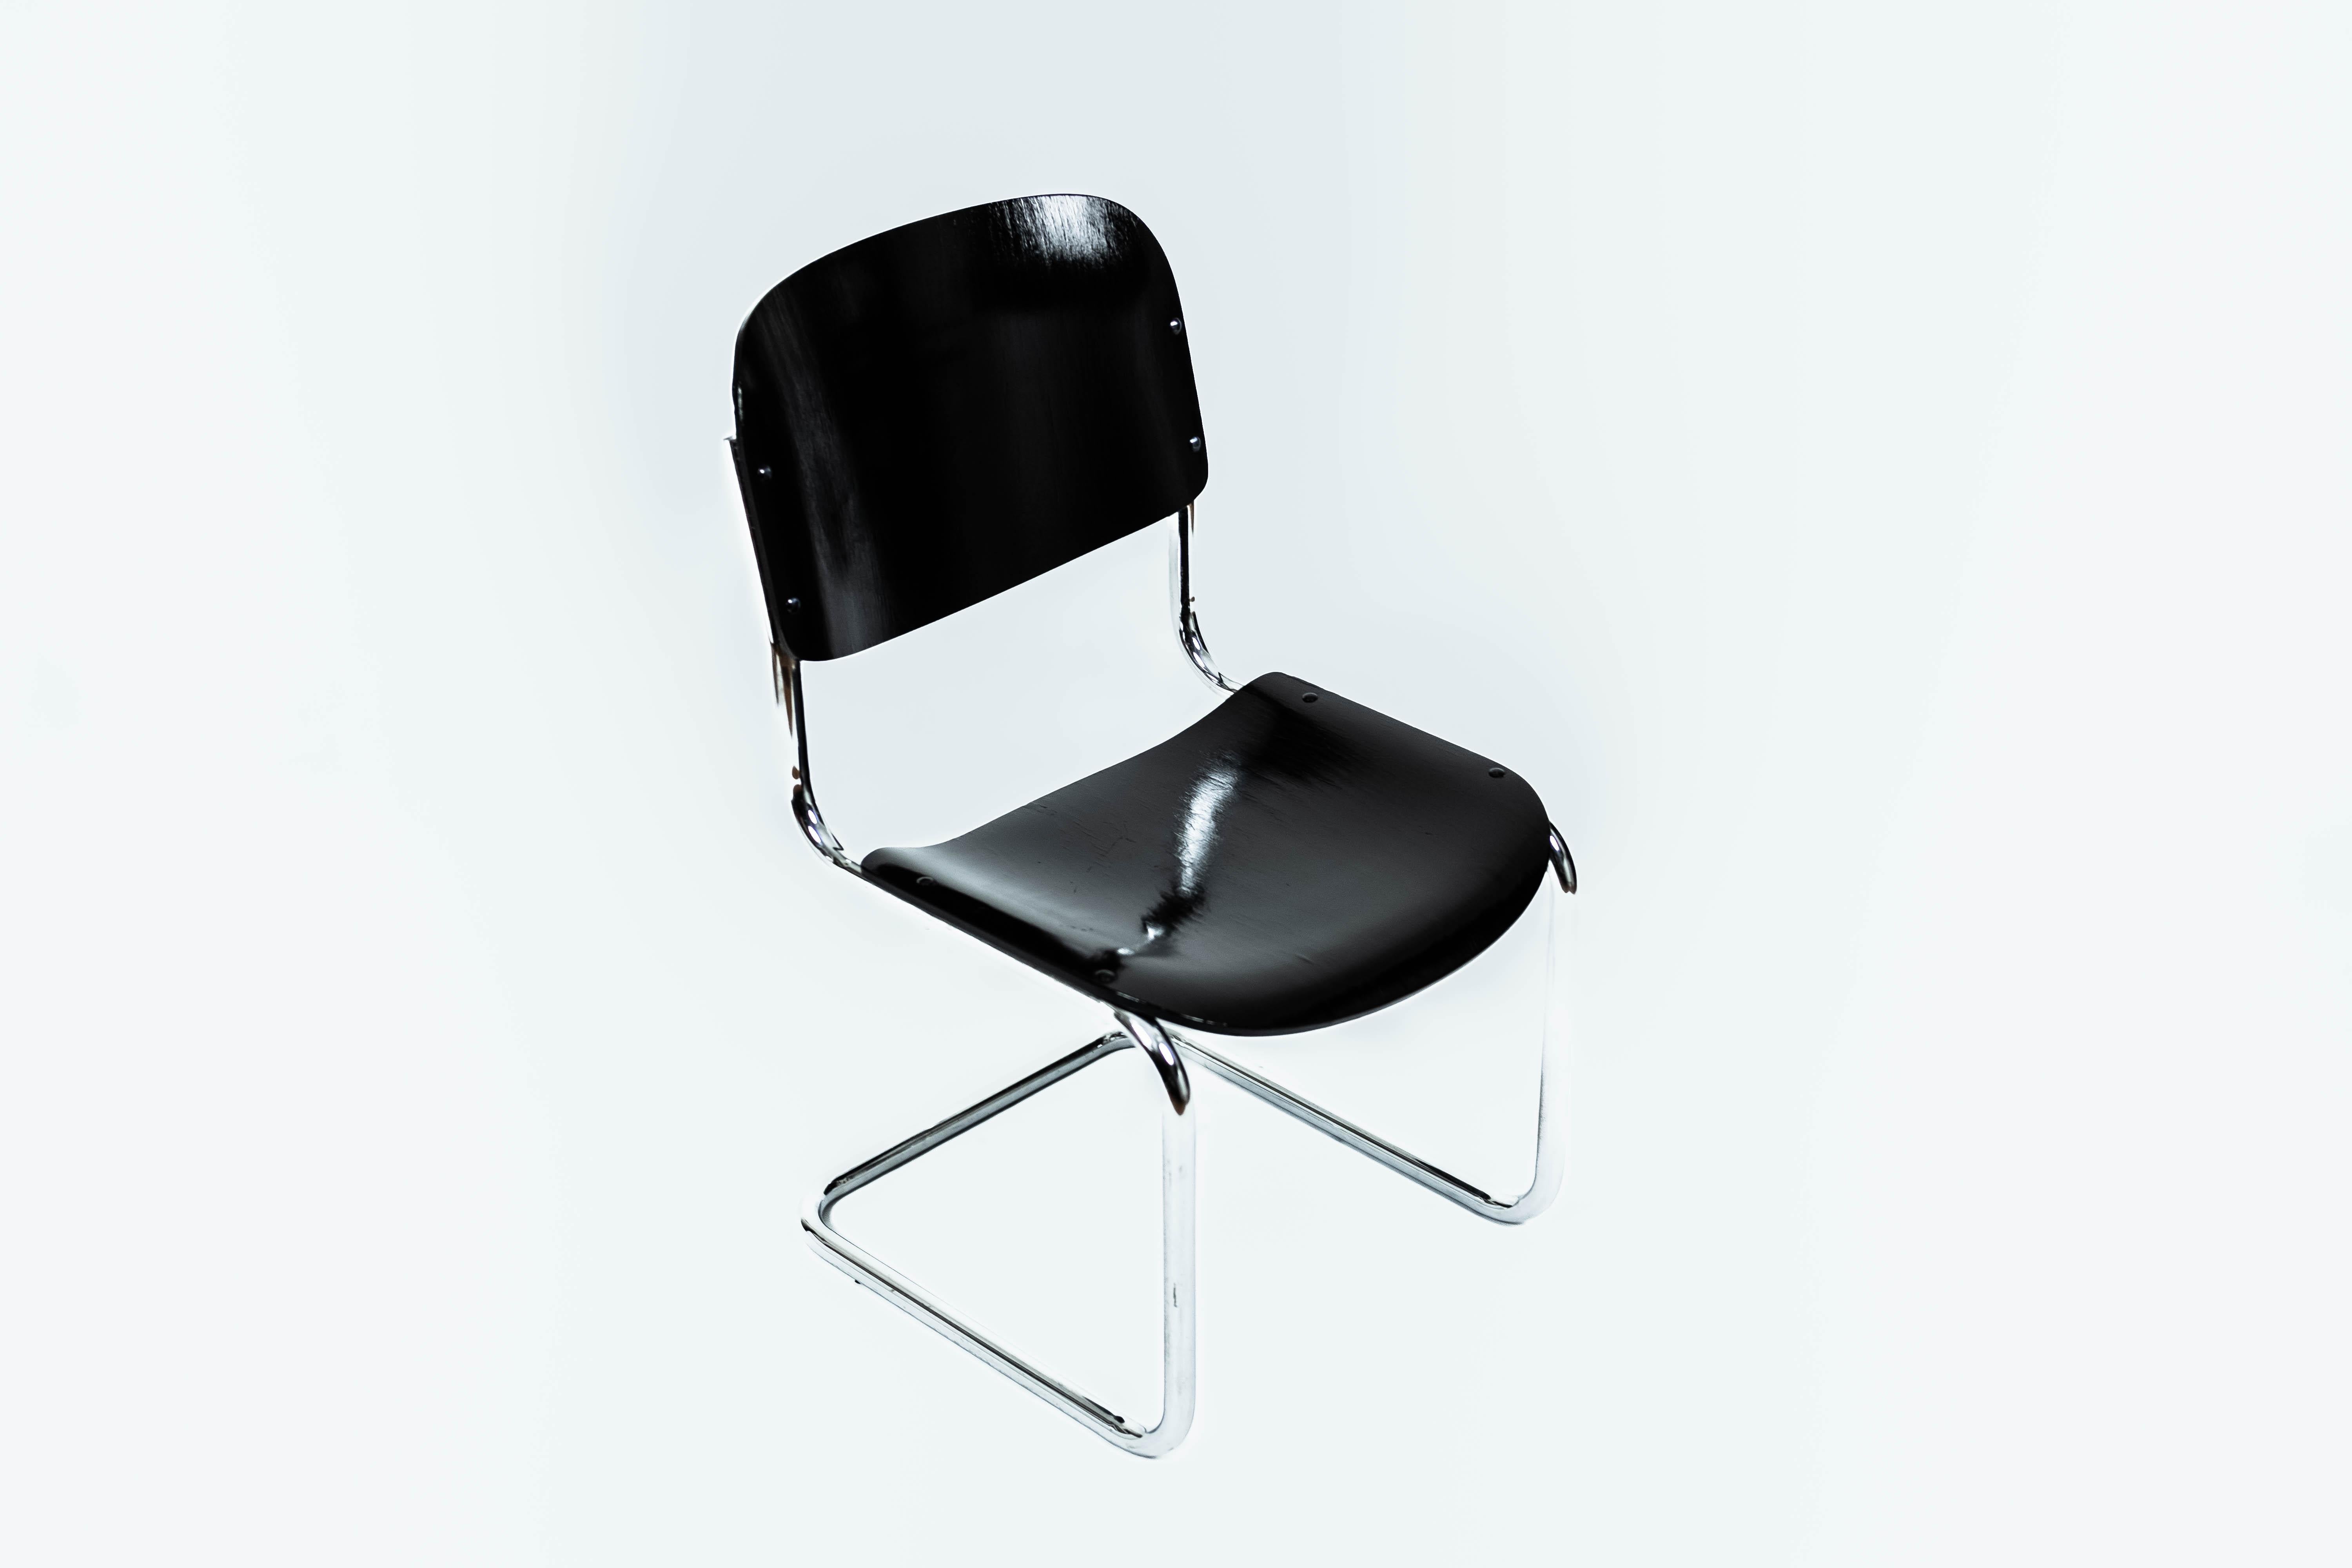 Black Steelpipe Chair in Bauhaus-Style (Vienna, 1970) In Good Condition For Sale In Wien, AT